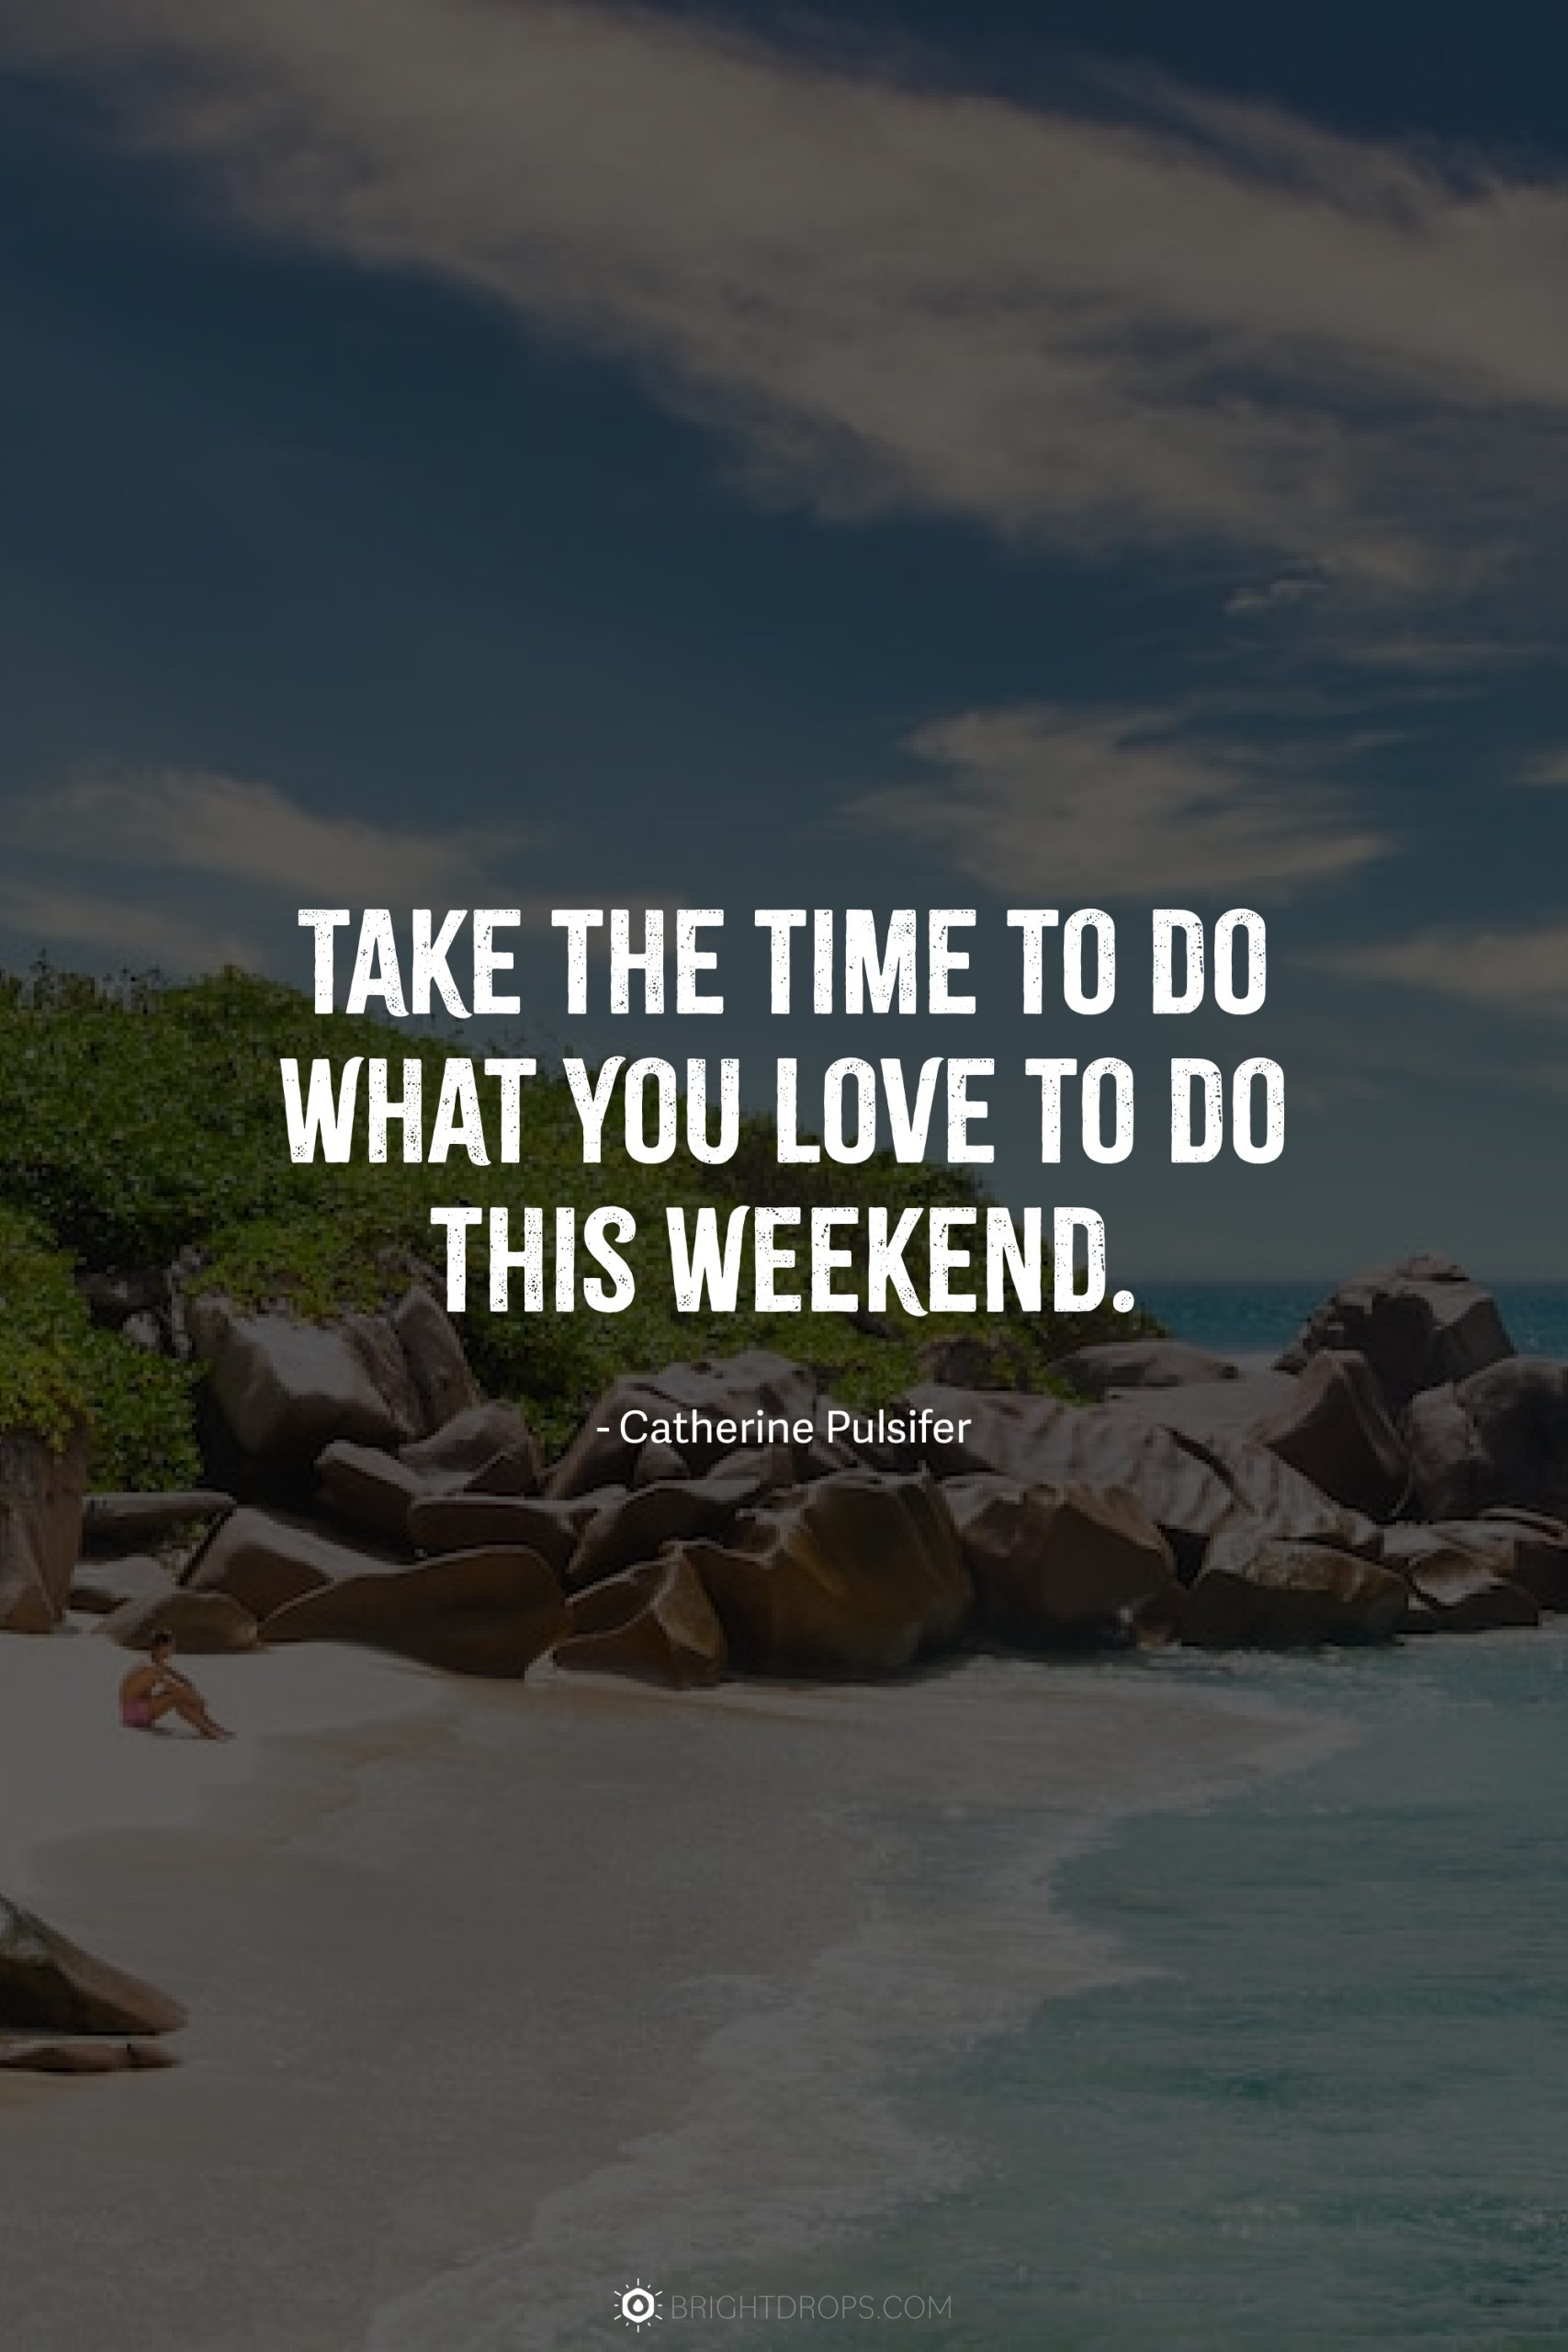 Take the time to do what you love to do this weekend.